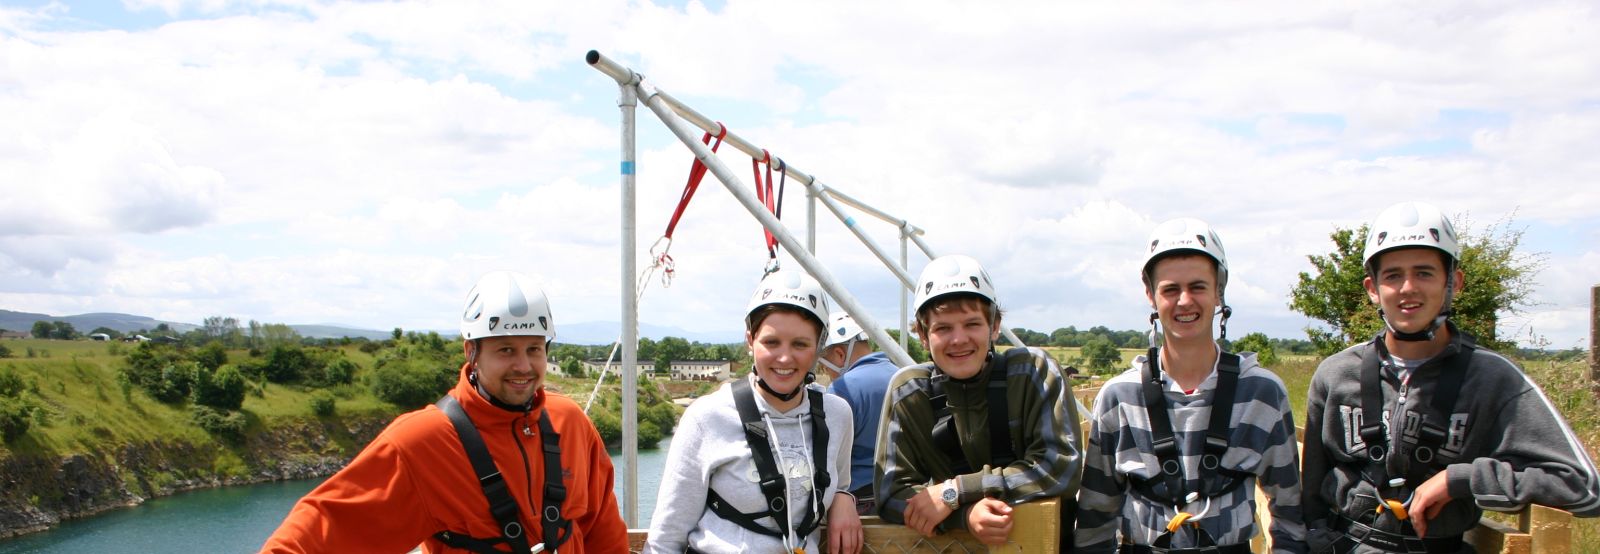 Abseiling Activity